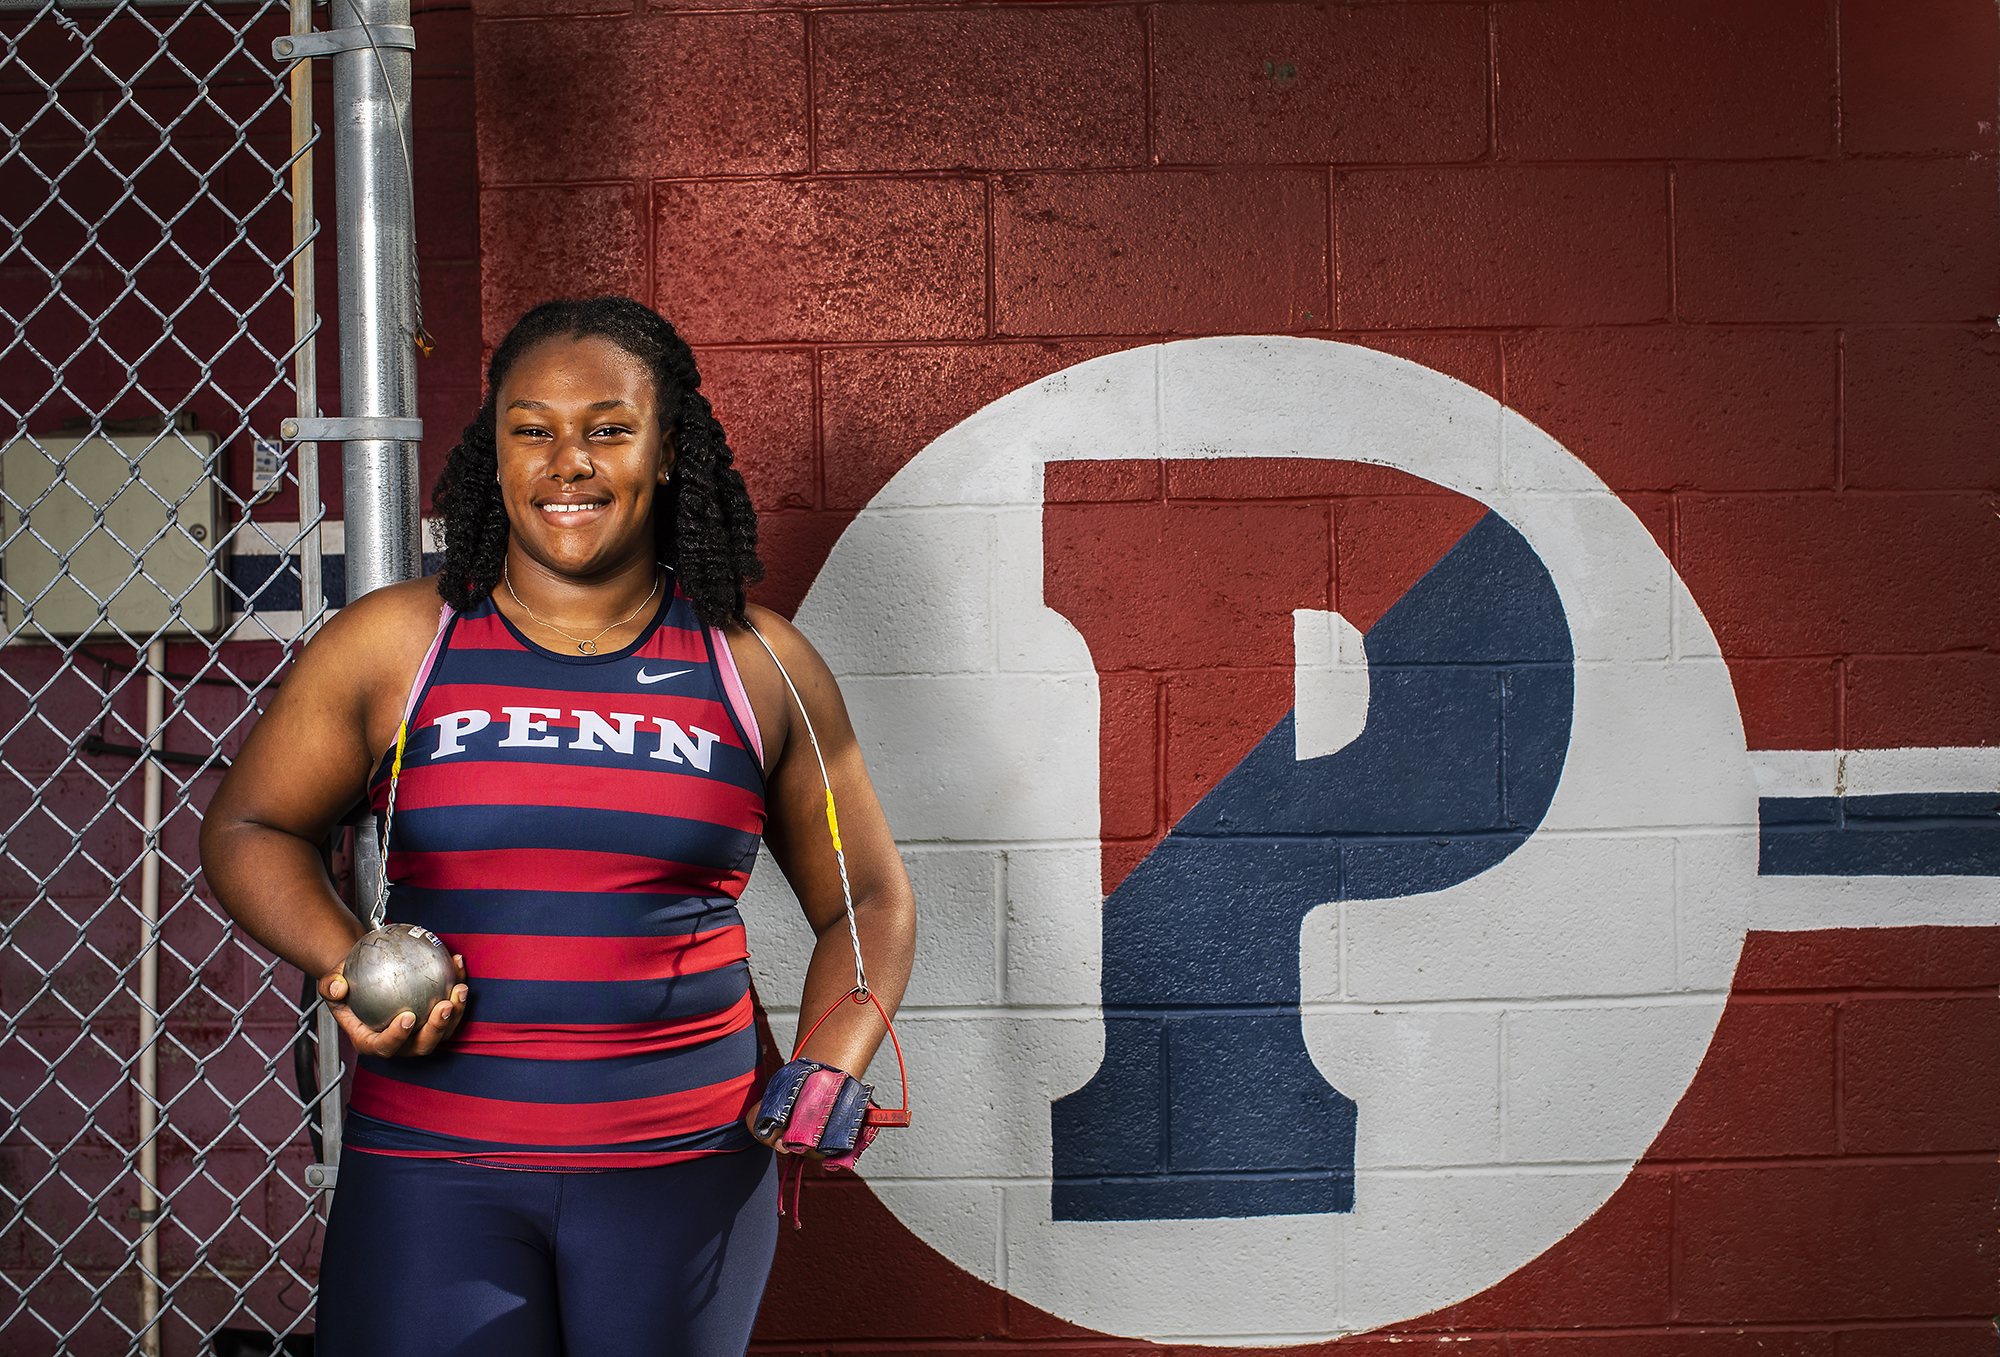 Rachel Lee Wilson poses with a hammer ball next to a Penn P painted on the wall.